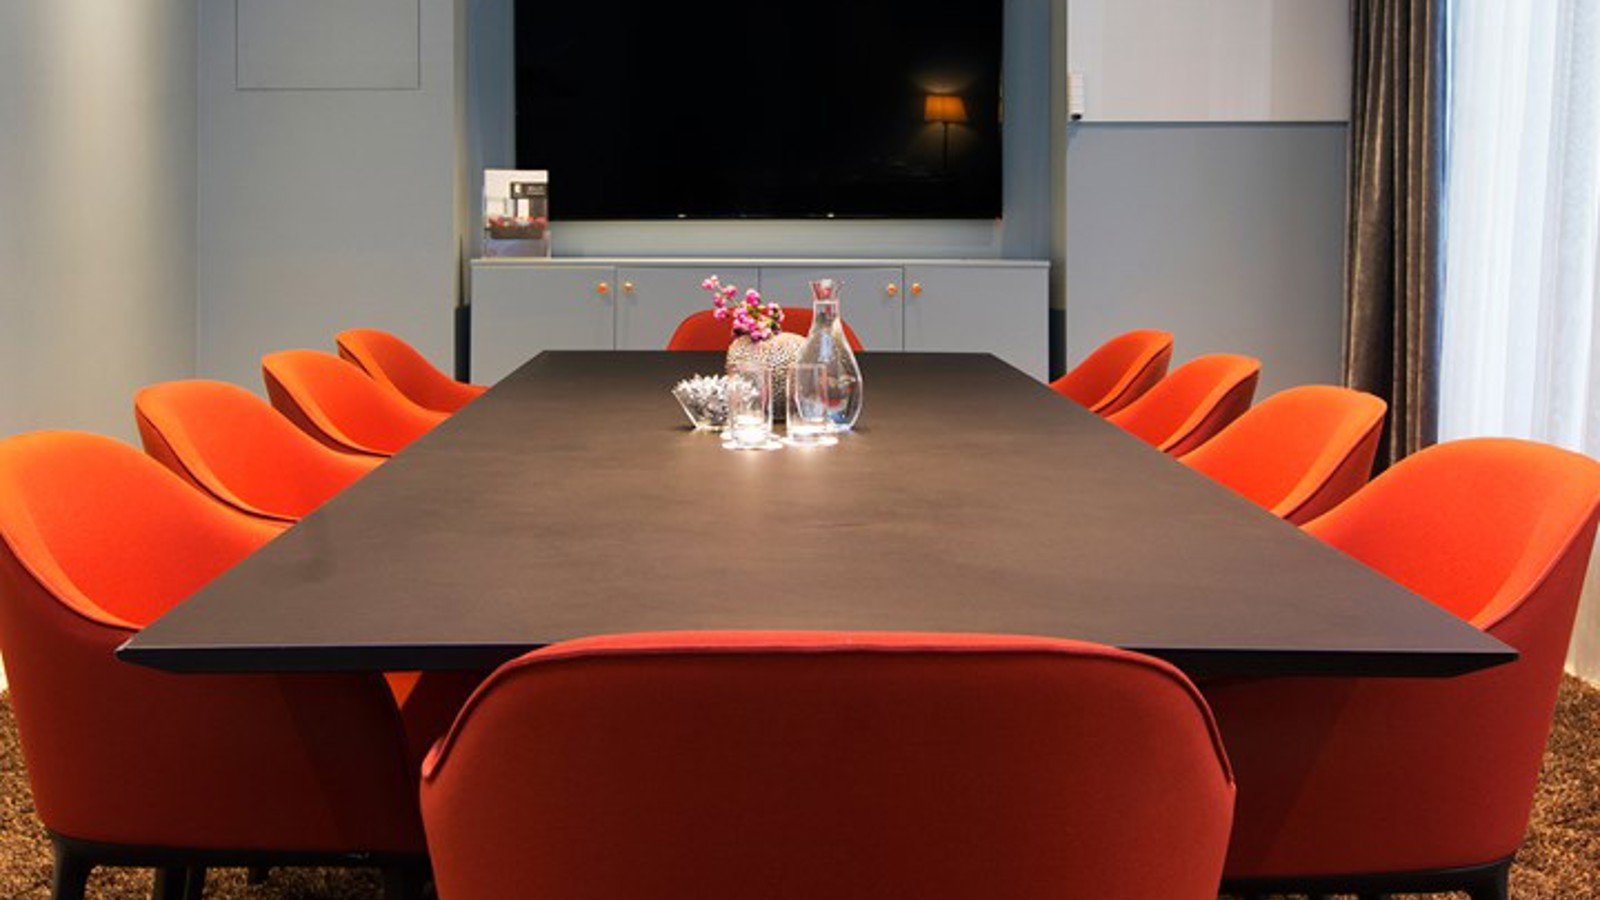 Conference room with board seating, brown table, red chairs and blue walls